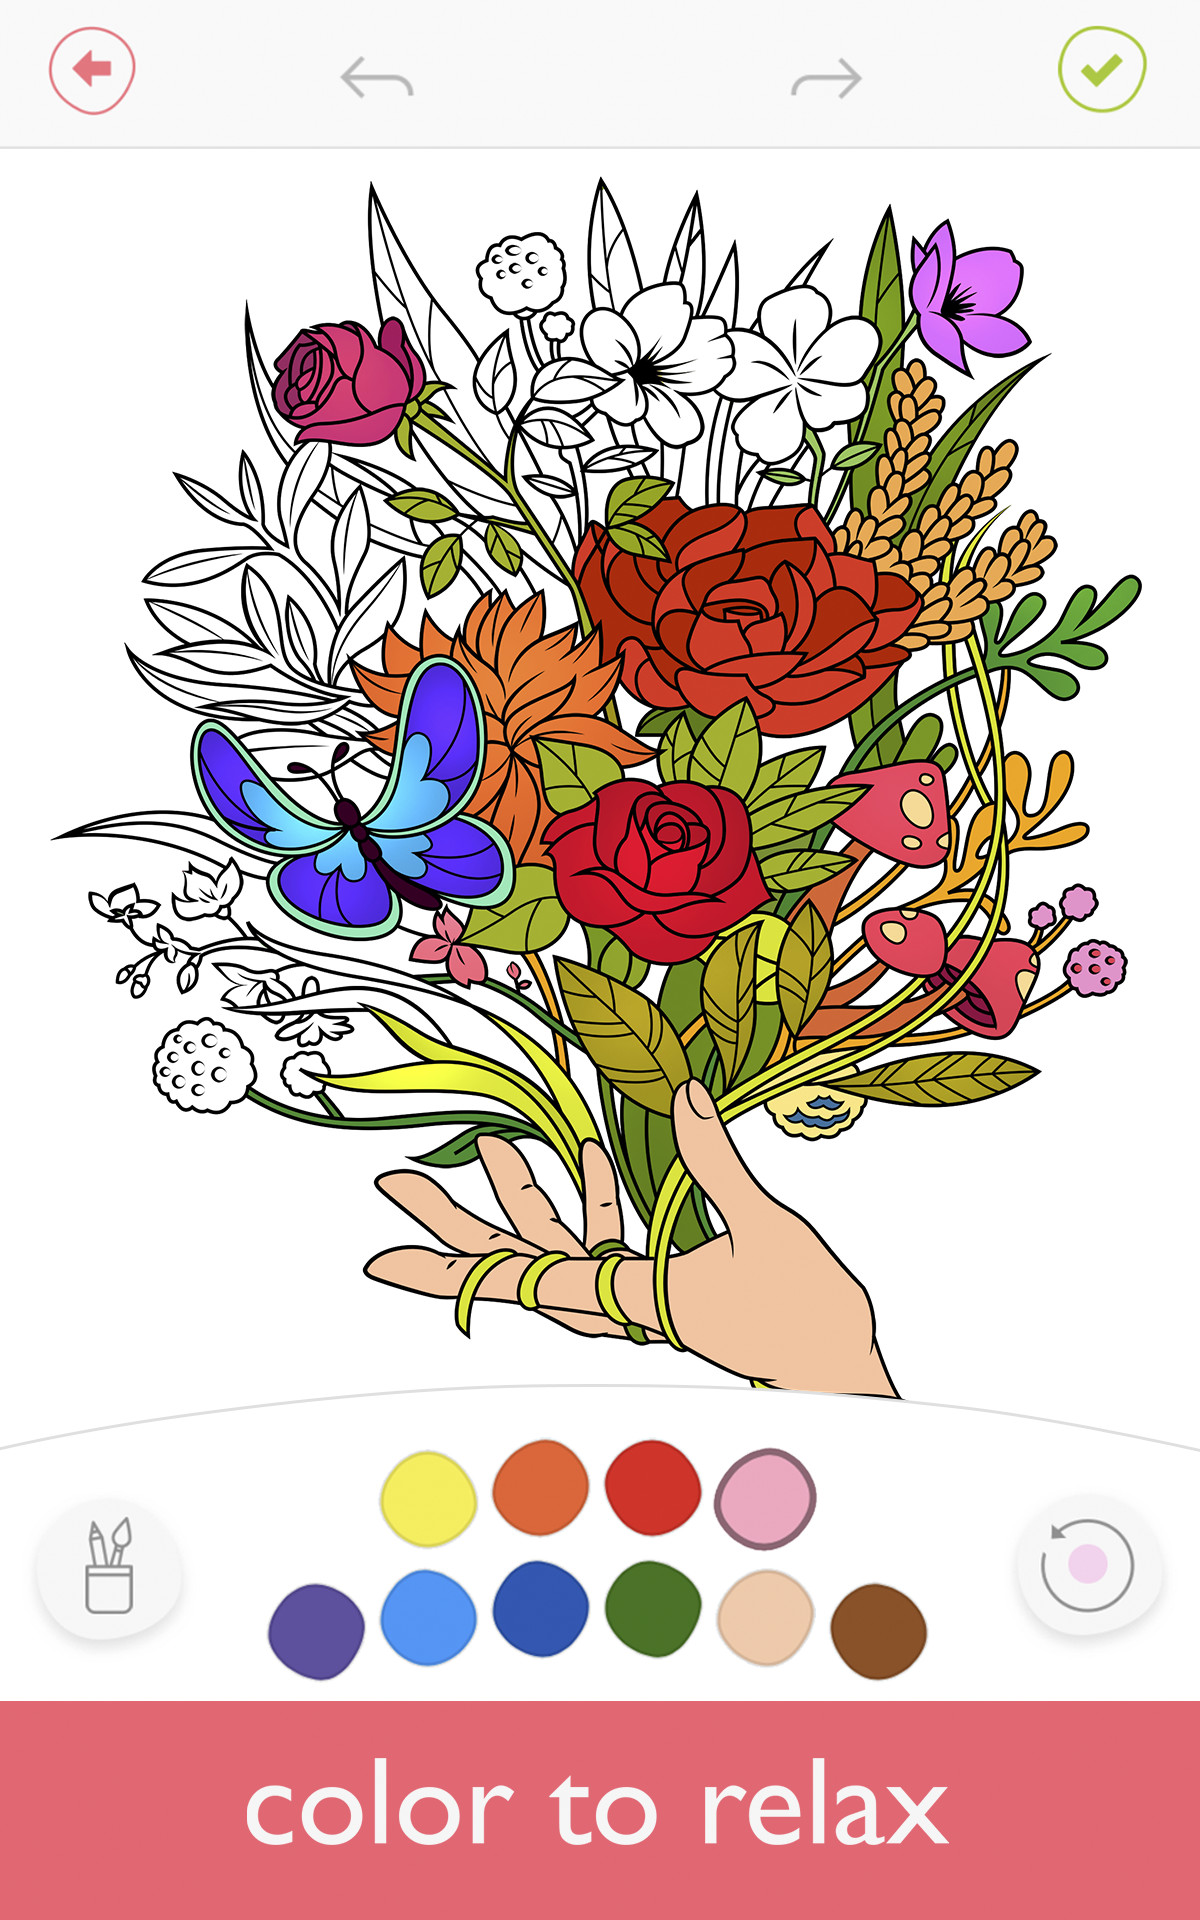 Coloring Book App For Adults Android
 Colorfy Coloring Book for Adults Best Free App Amazon